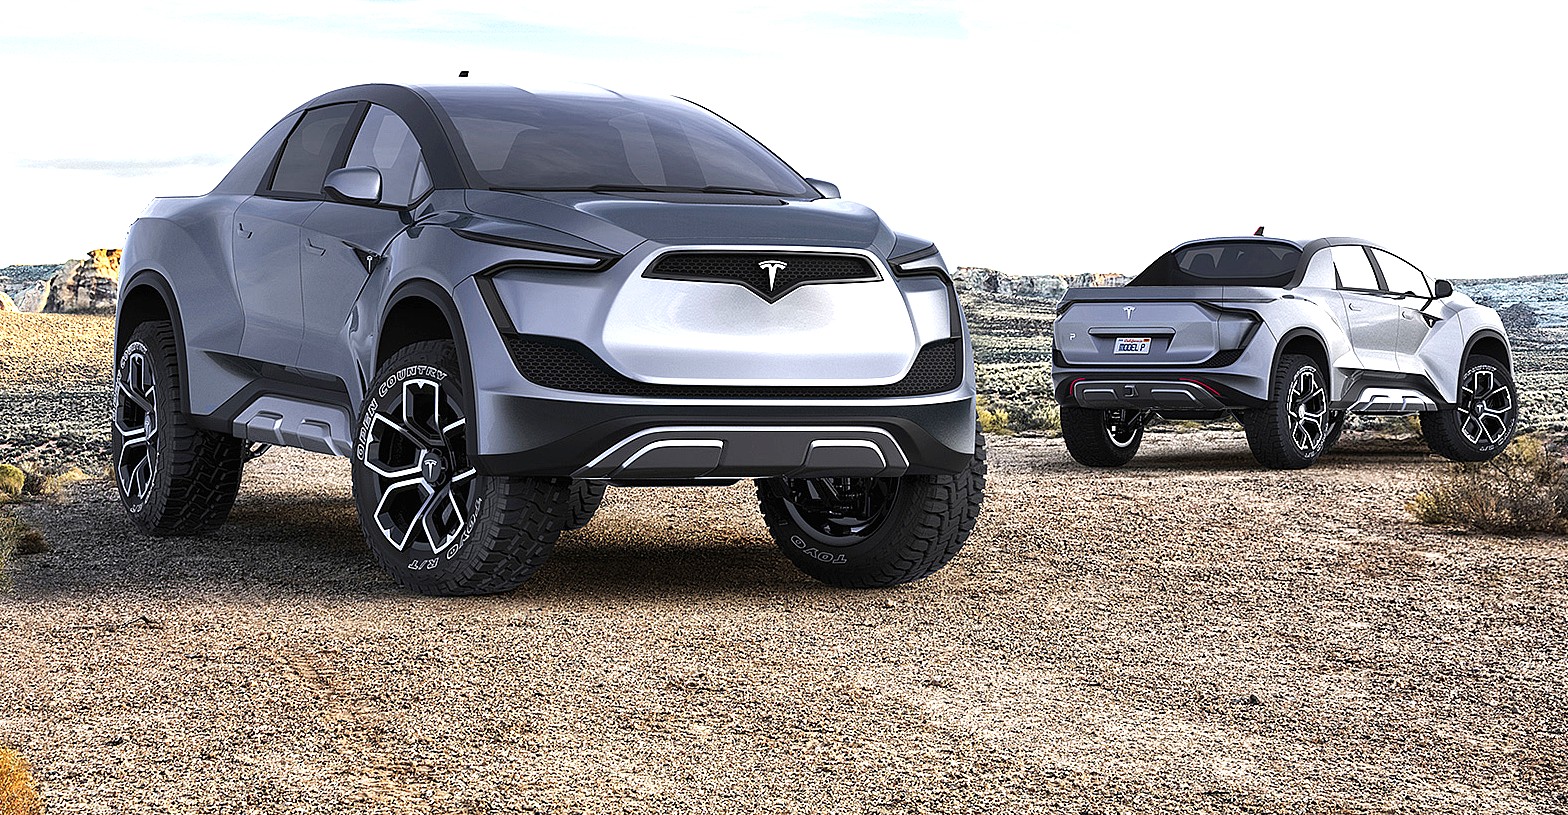 Tesla pickup truck’s starting price to be $49K at most, undercutting Rivian’s R1T